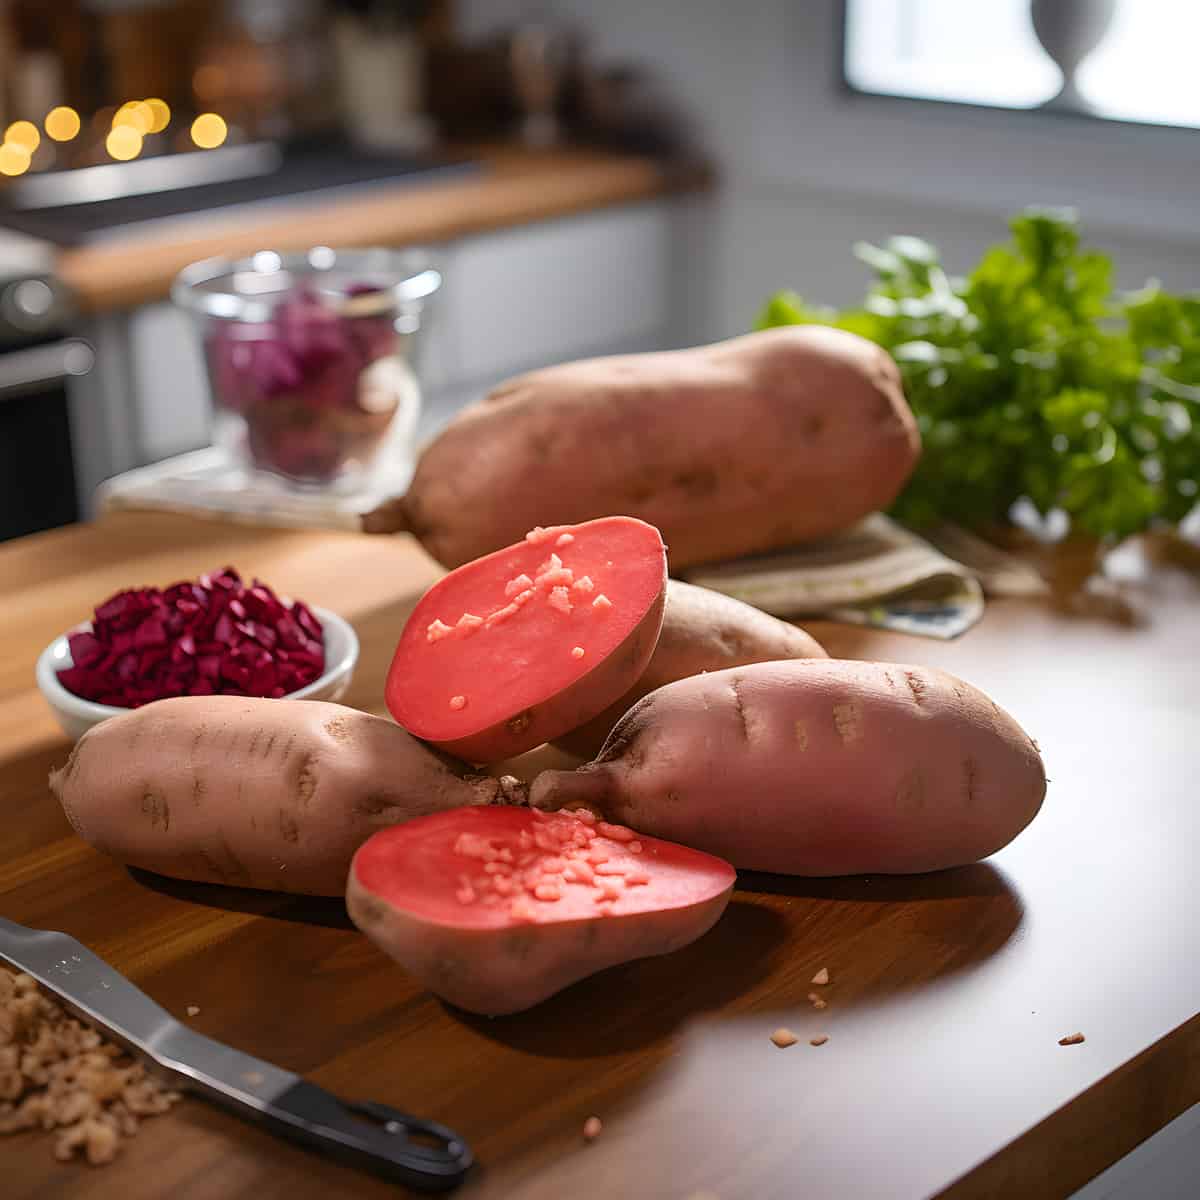 Oklamex Red Sweet Potatoes on a kitchen counter